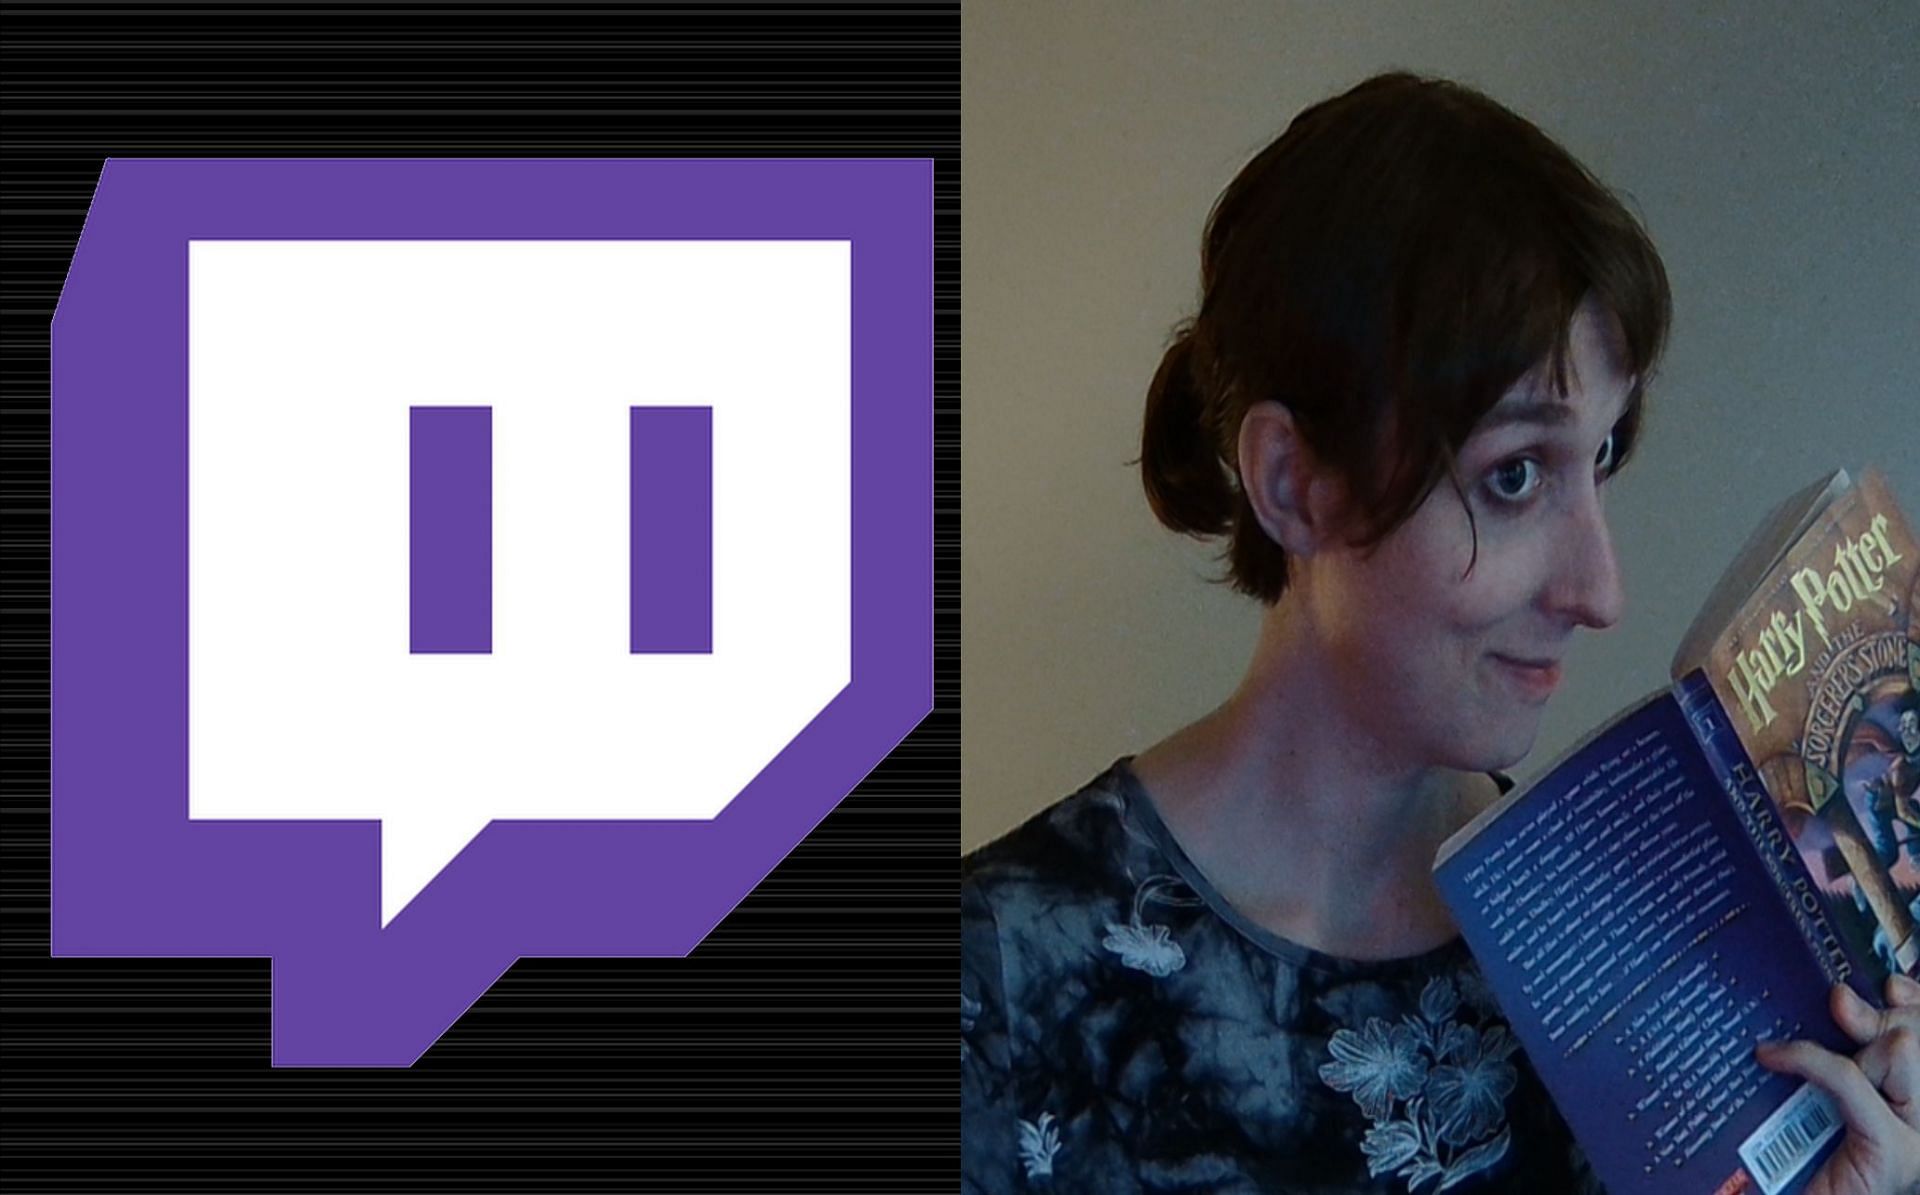 Twitch streamer Narcissa Wright has been permanently banned from Twitch (Image via Sportskeeda)